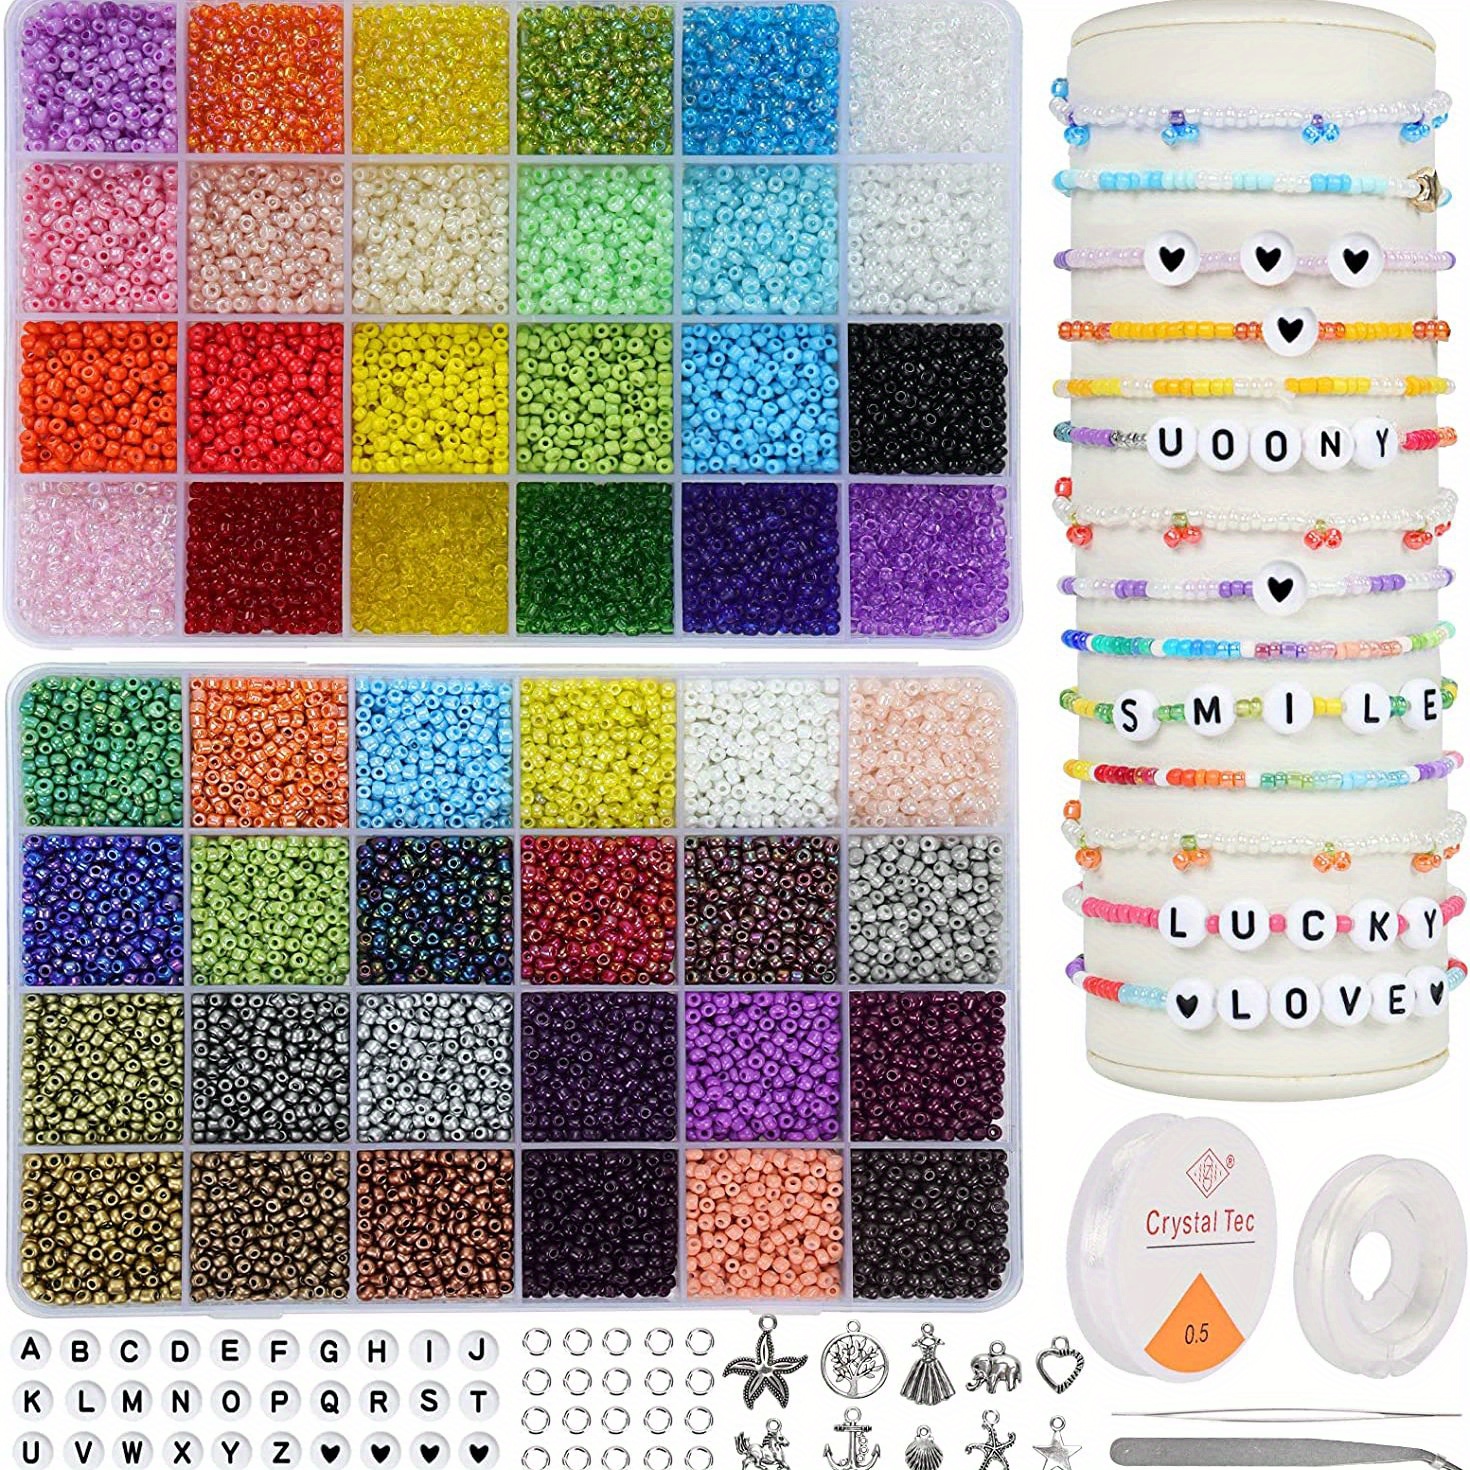 UOONY 35000pcs 2mm Glass Seed Beads for Jewelry Making Kit, 250pcs Alphabet  Letter Beads, Tiny Beads Set for Bracelets Making, DIY, Art and Craft with